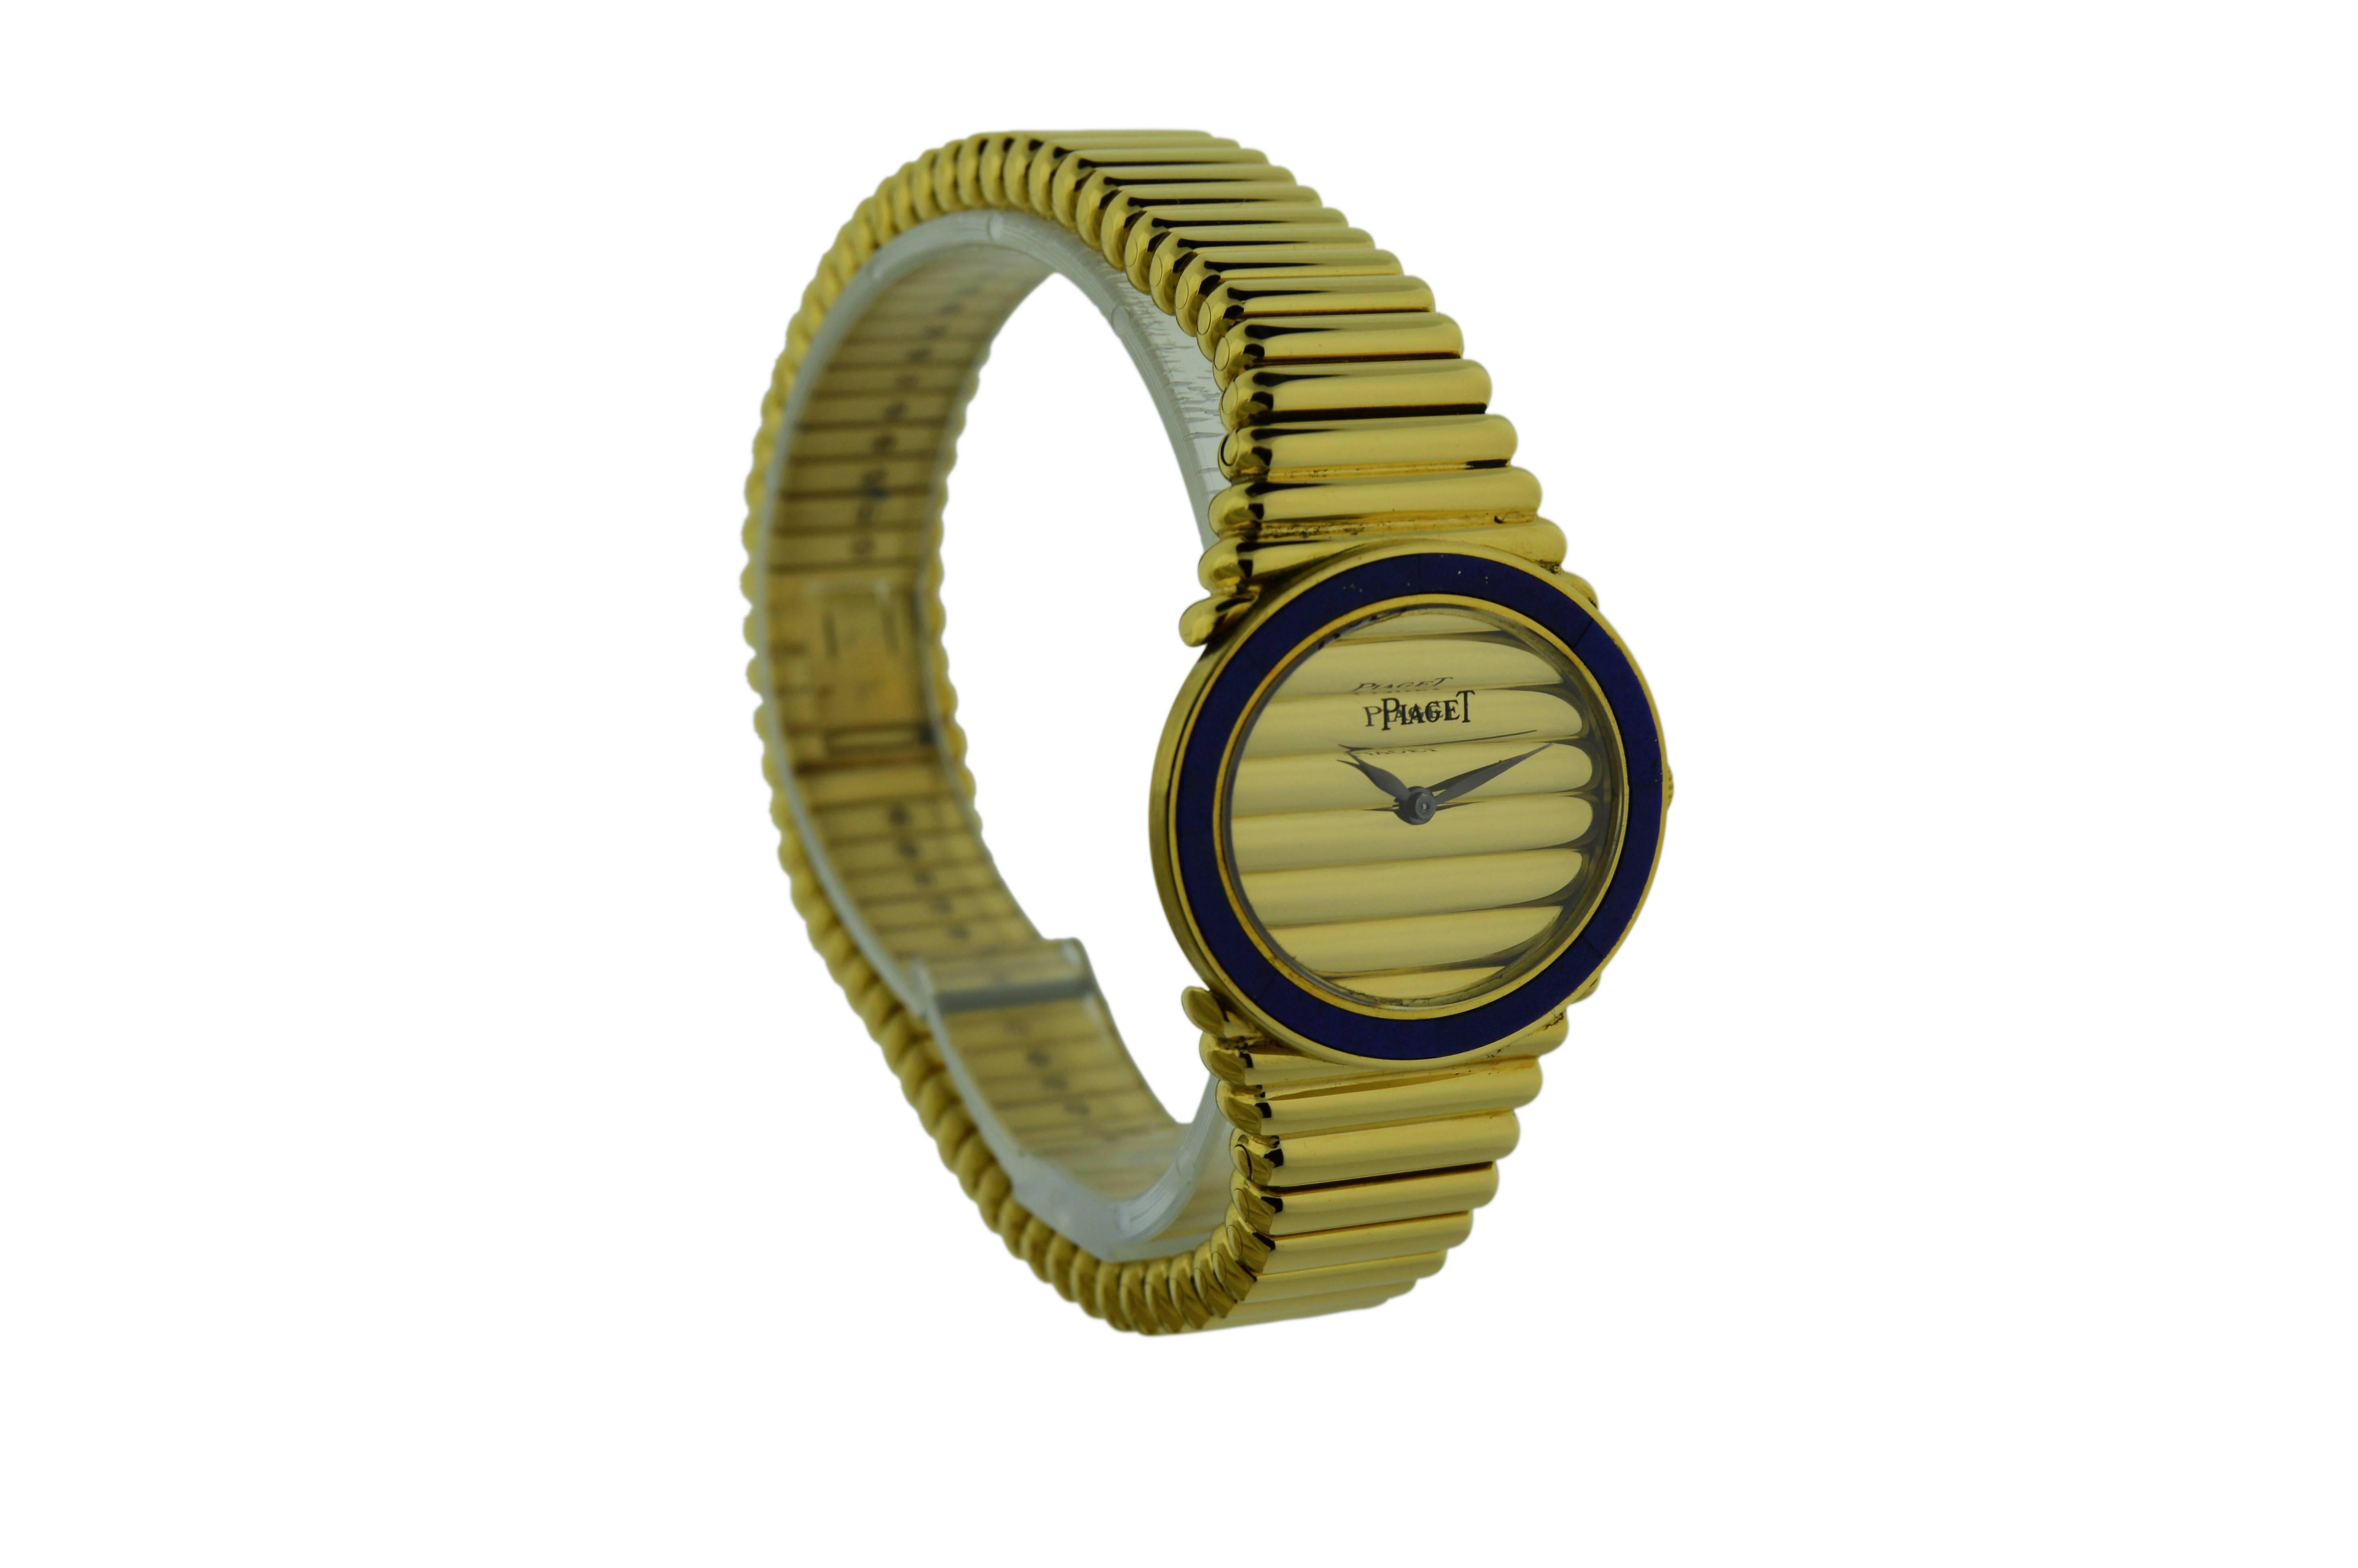 FACTORY / HOUSE: Piaget Watch Company
STYLE / REFERENCE: Gold Bracelet Watch / Lapis Lazuli  / Ref. 264486
METAL / MATERIAL: 18Kt. Yellow Gold 
DIMENSIONS: 24mm  X  27mm
CIRCA: 1970's
MOVEMENT / CALIBER: 17 Jewels / Cal. 9D
DIAL / HANDS: Original,